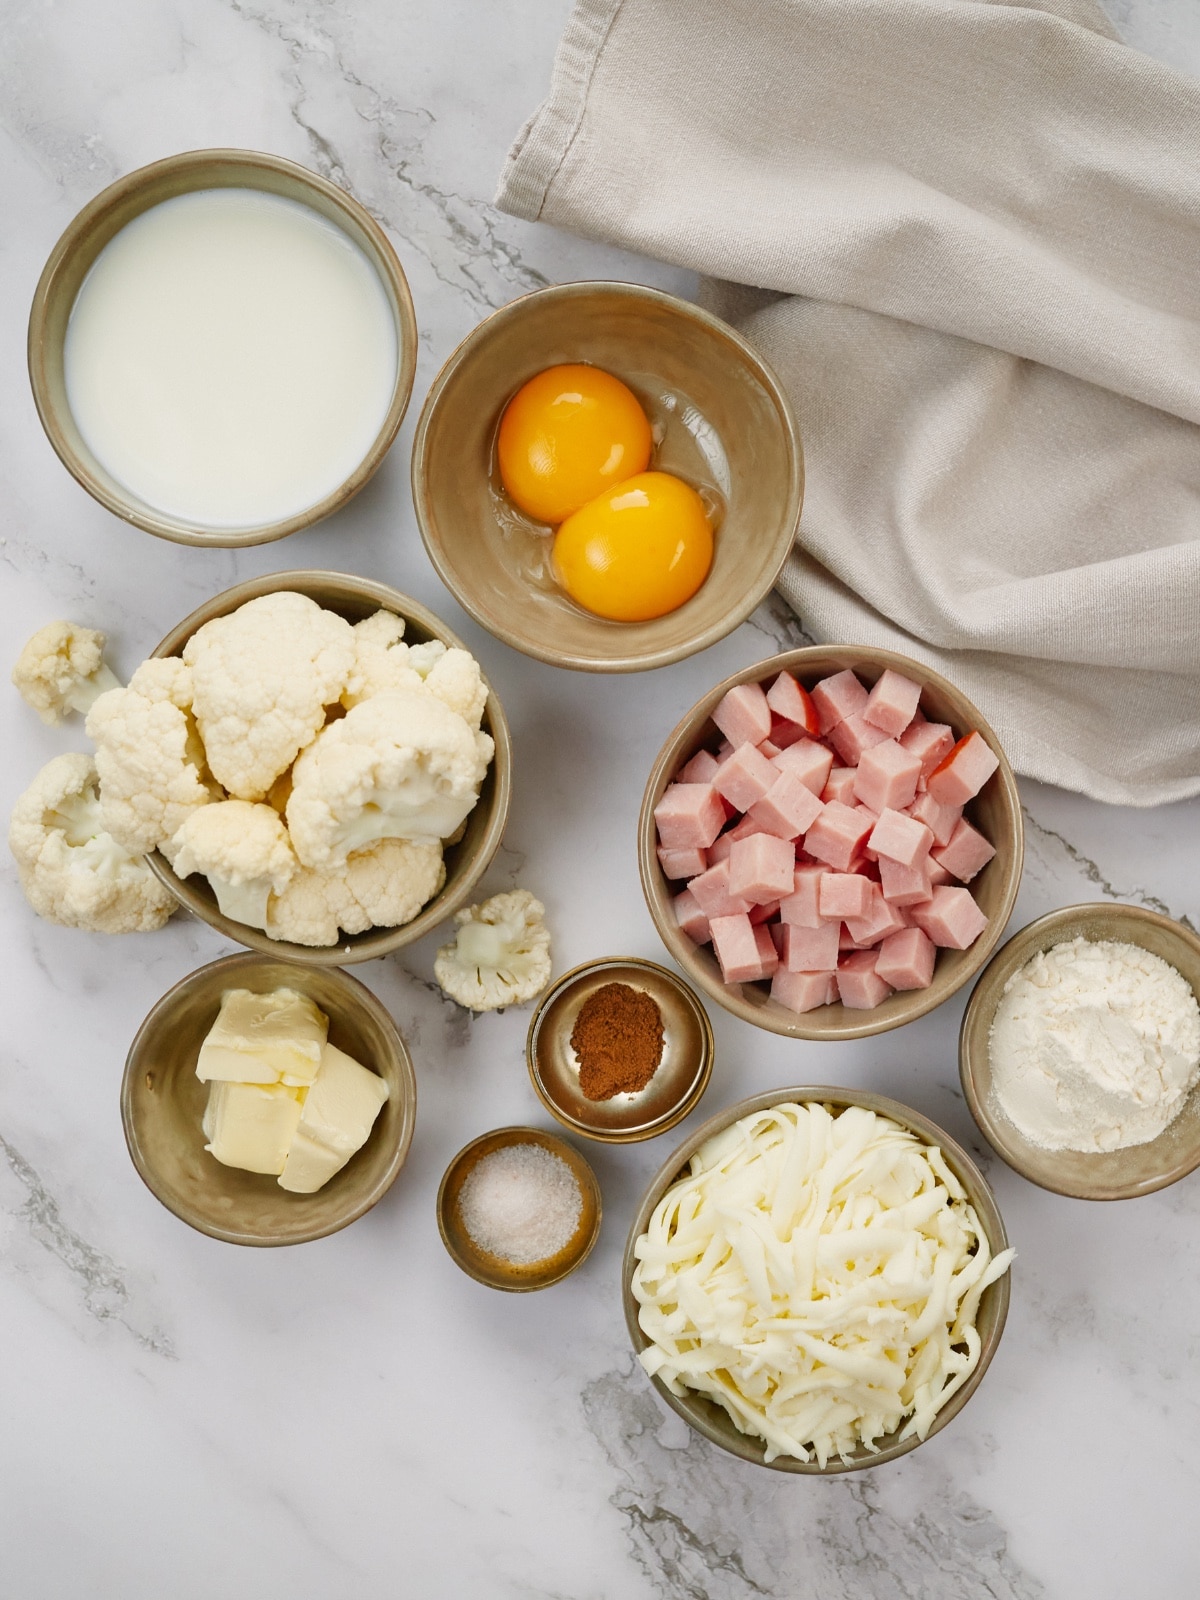 ingredients for ham and cauliflower casserole in small bowls on a light background